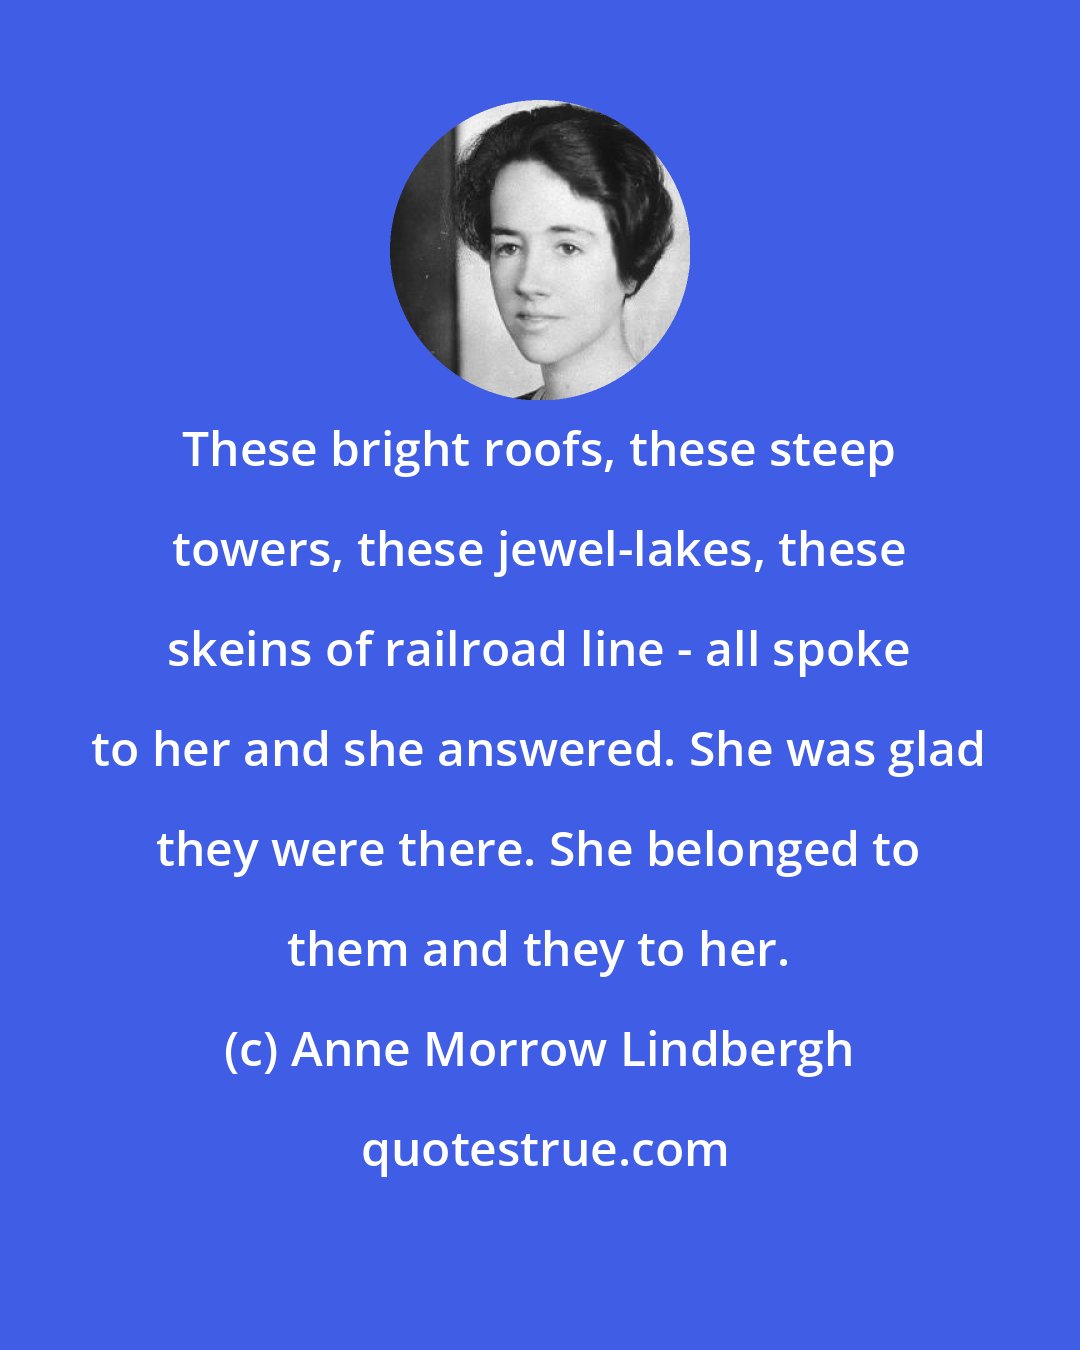 Anne Morrow Lindbergh: These bright roofs, these steep towers, these jewel-lakes, these skeins of railroad line - all spoke to her and she answered. She was glad they were there. She belonged to them and they to her.